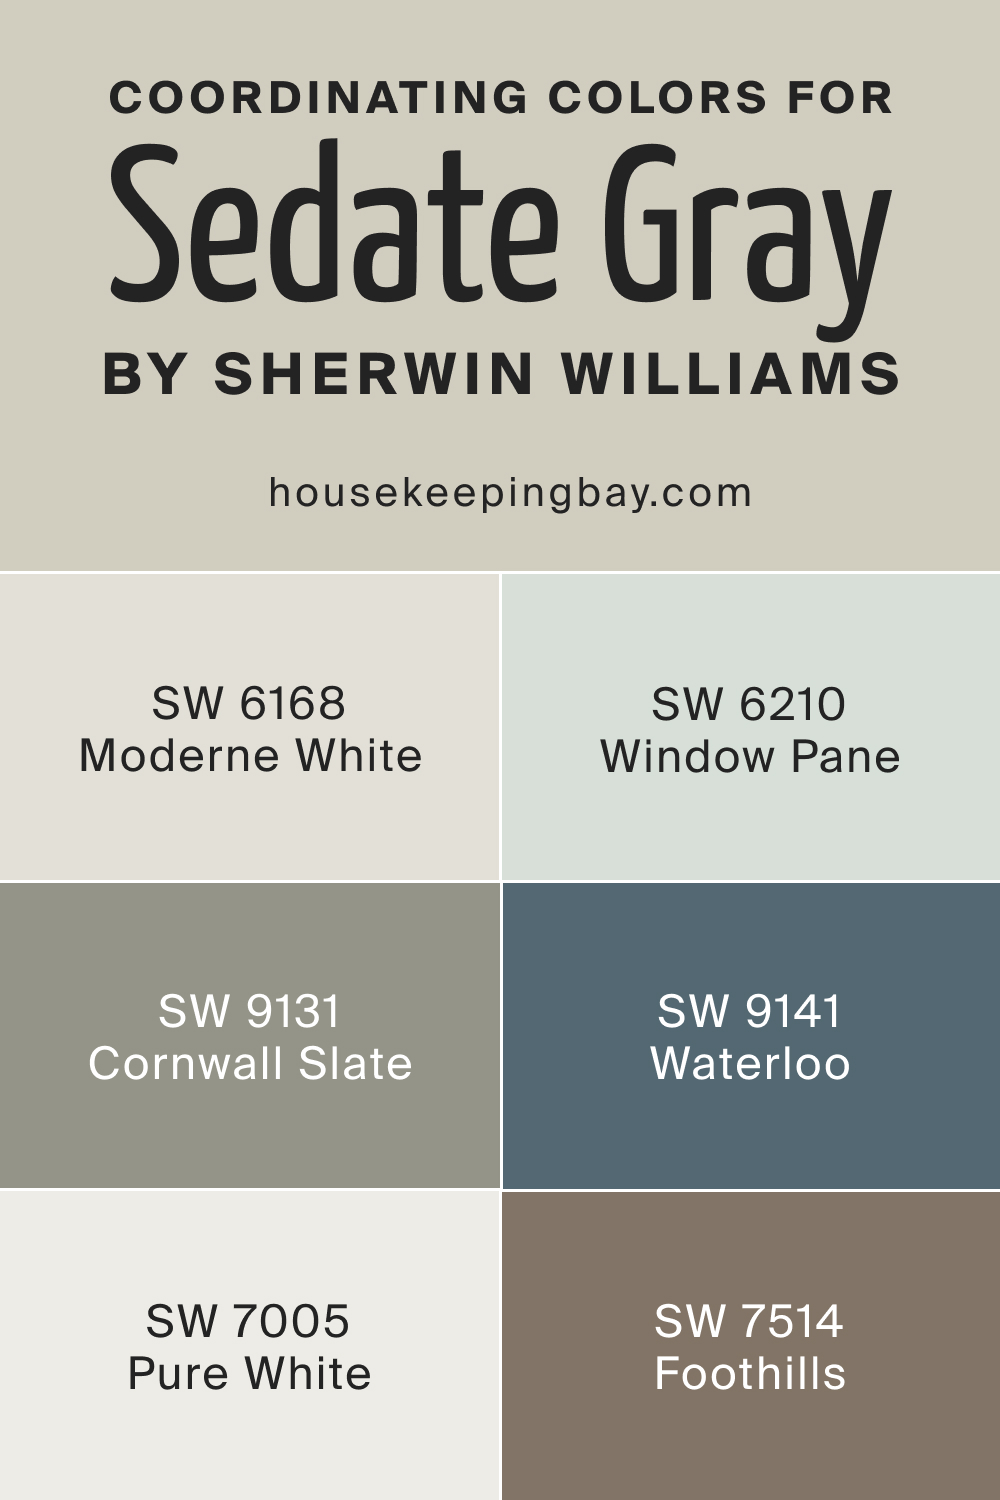 Coordinating Colors for SW 6169 Sedate Gray by Sherwin Williams